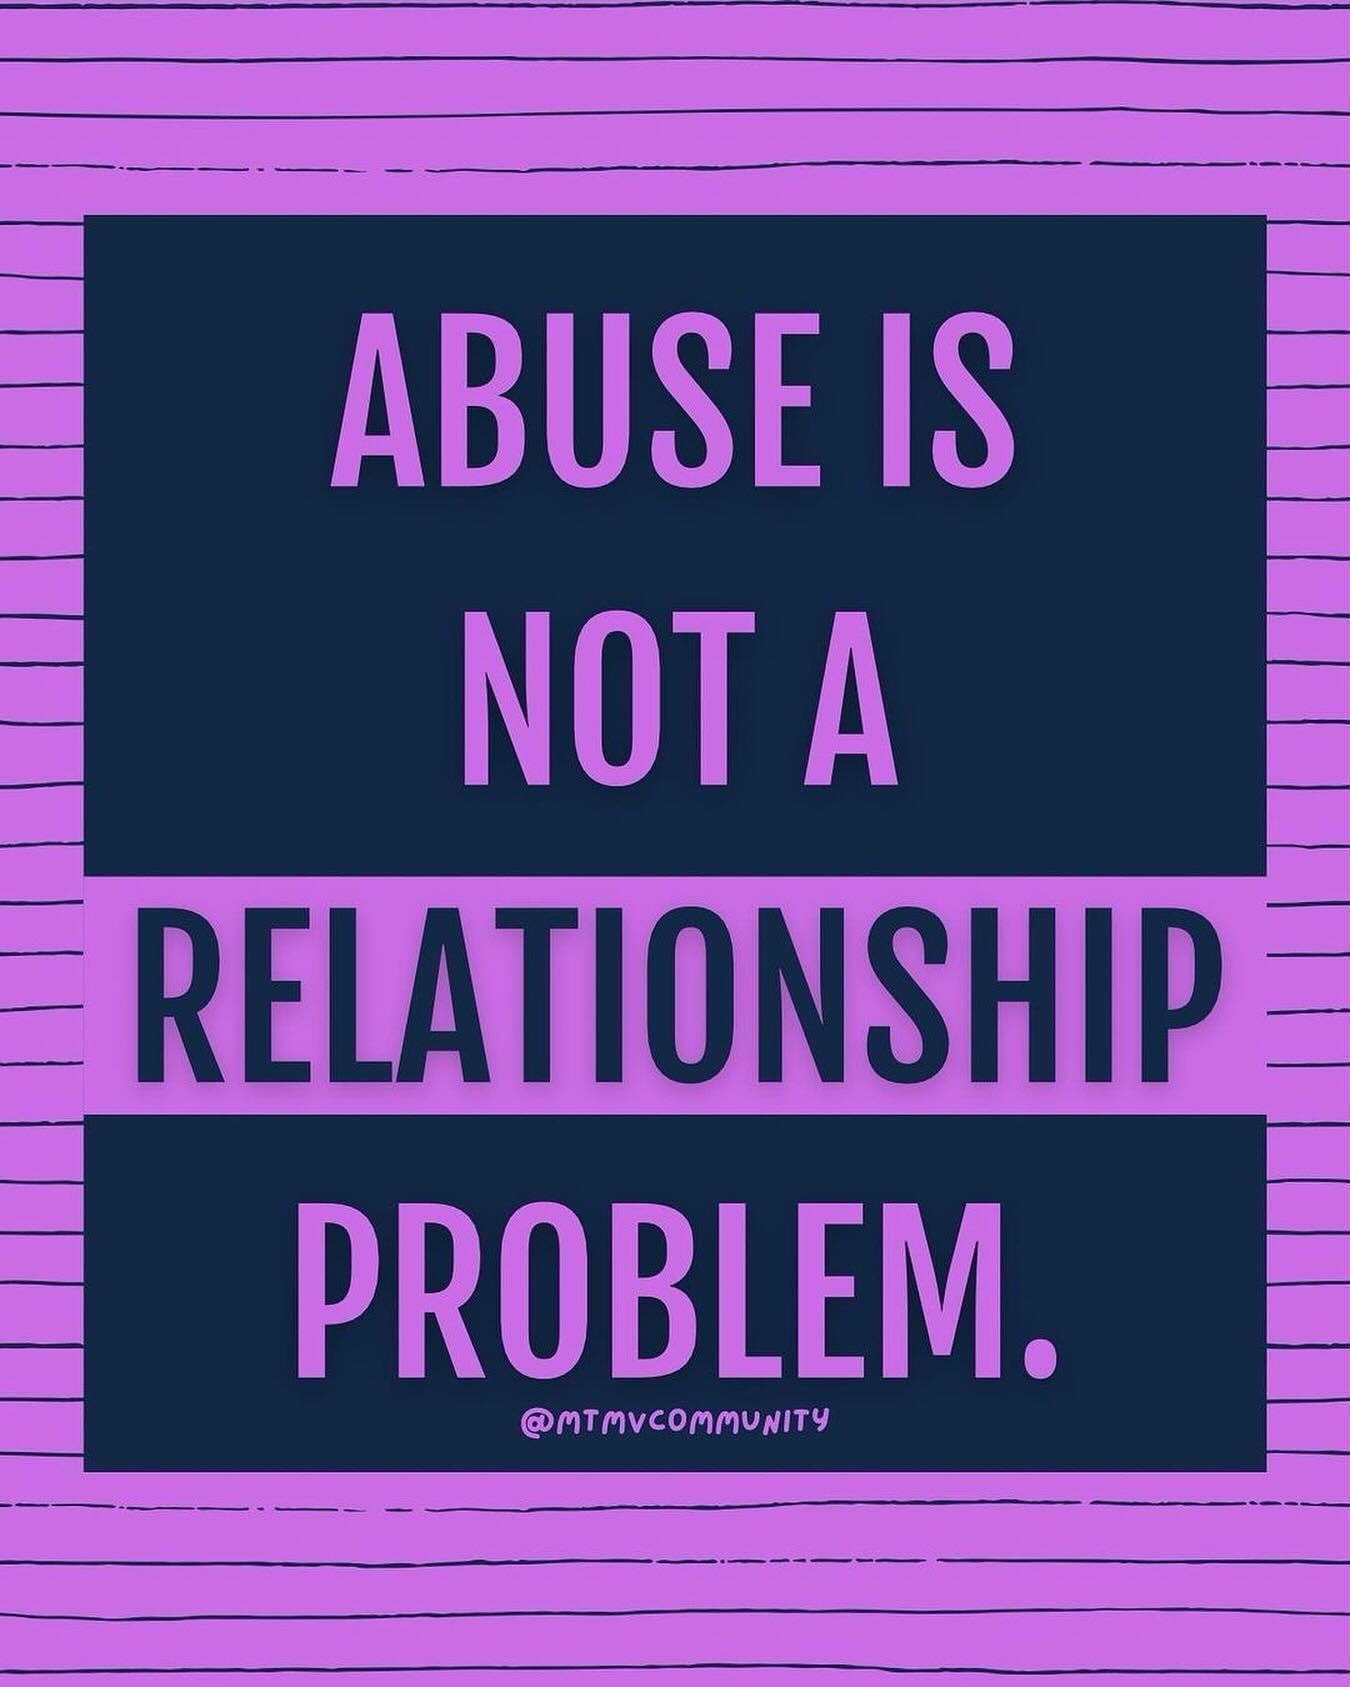 Abuse is not a relationship problem. Abuse is an abuser problem that an individual needs to address independently. The issue is not the relationship. Relationship problems are challenges that can in good faith be potentially fixed and safely navigate